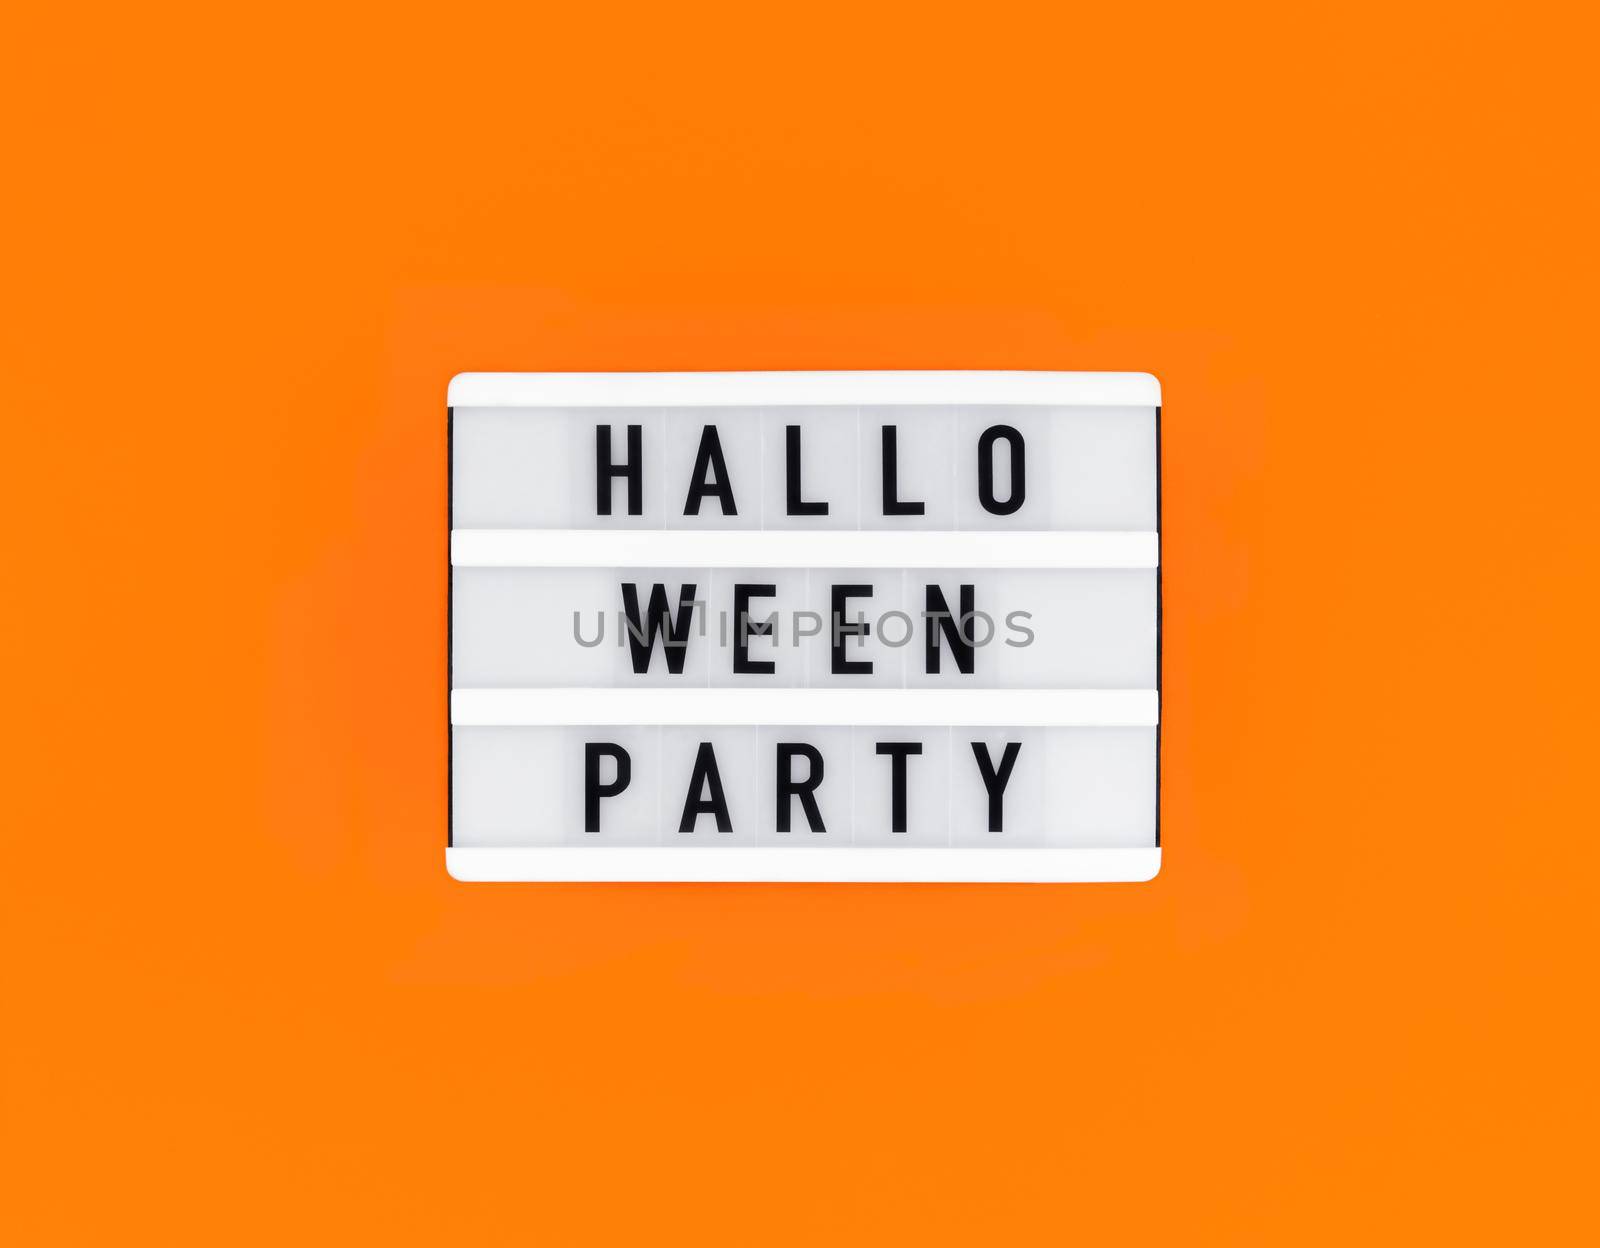 Light box with Halloween party text on an orange background.